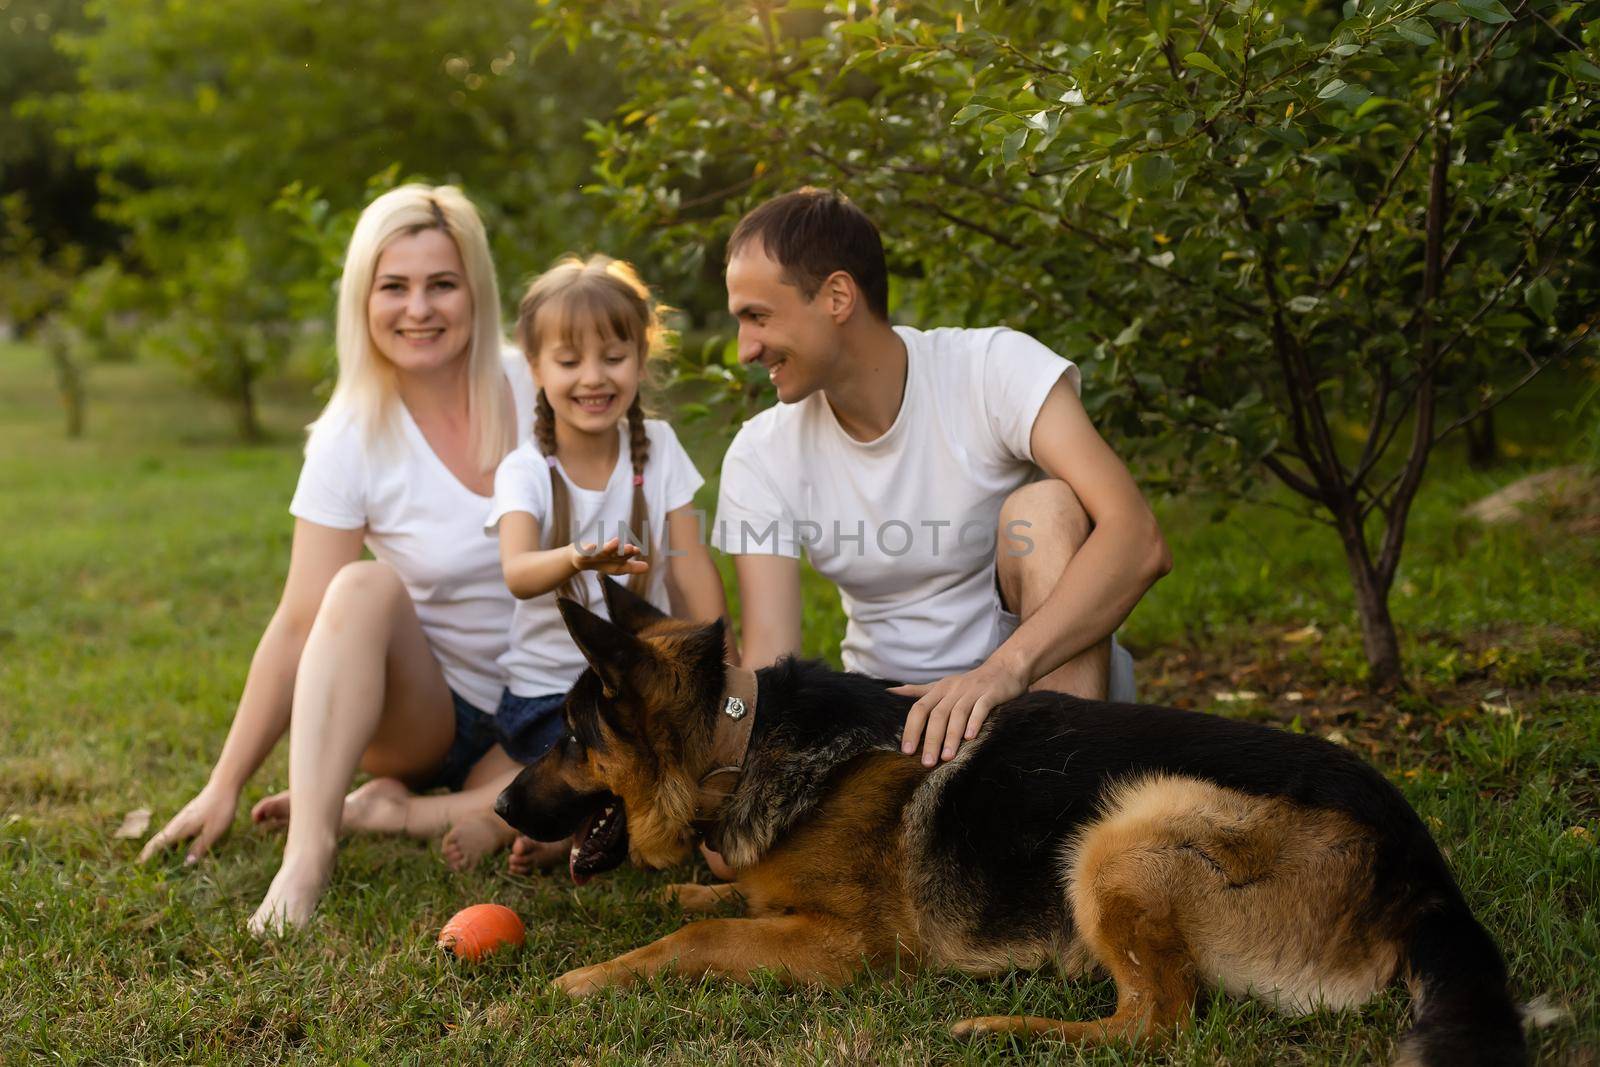 Portrait of an extended family with their pet dog sitting at the park